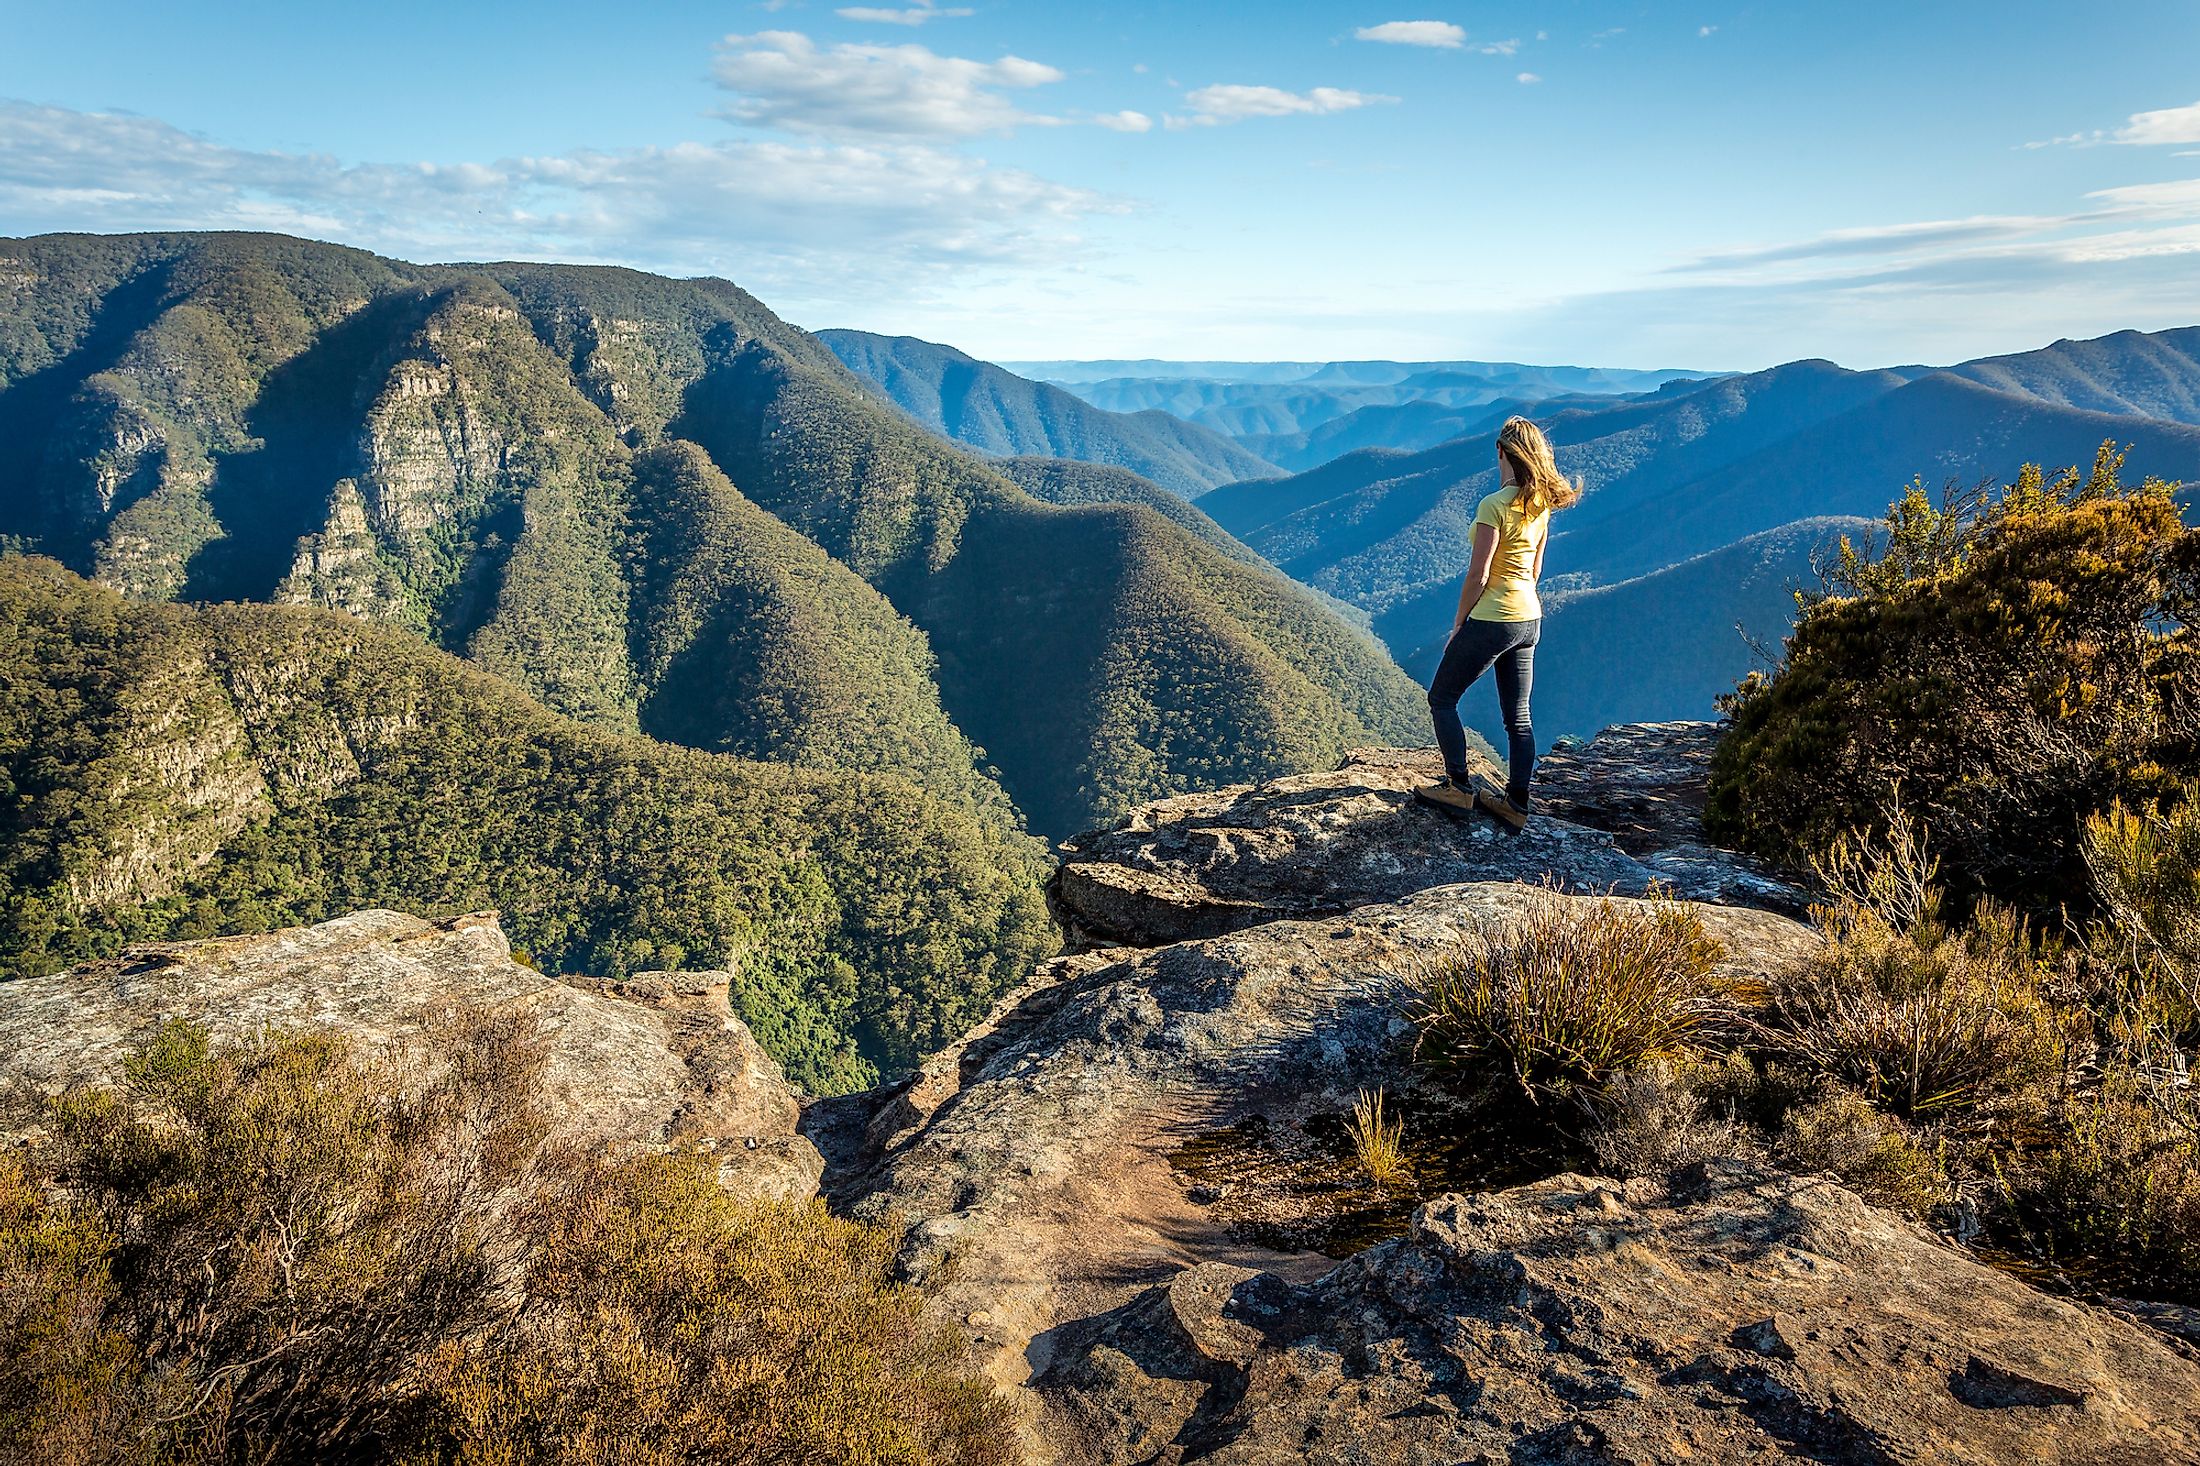 A female hiker on the mountains of the Great Dividing Range.